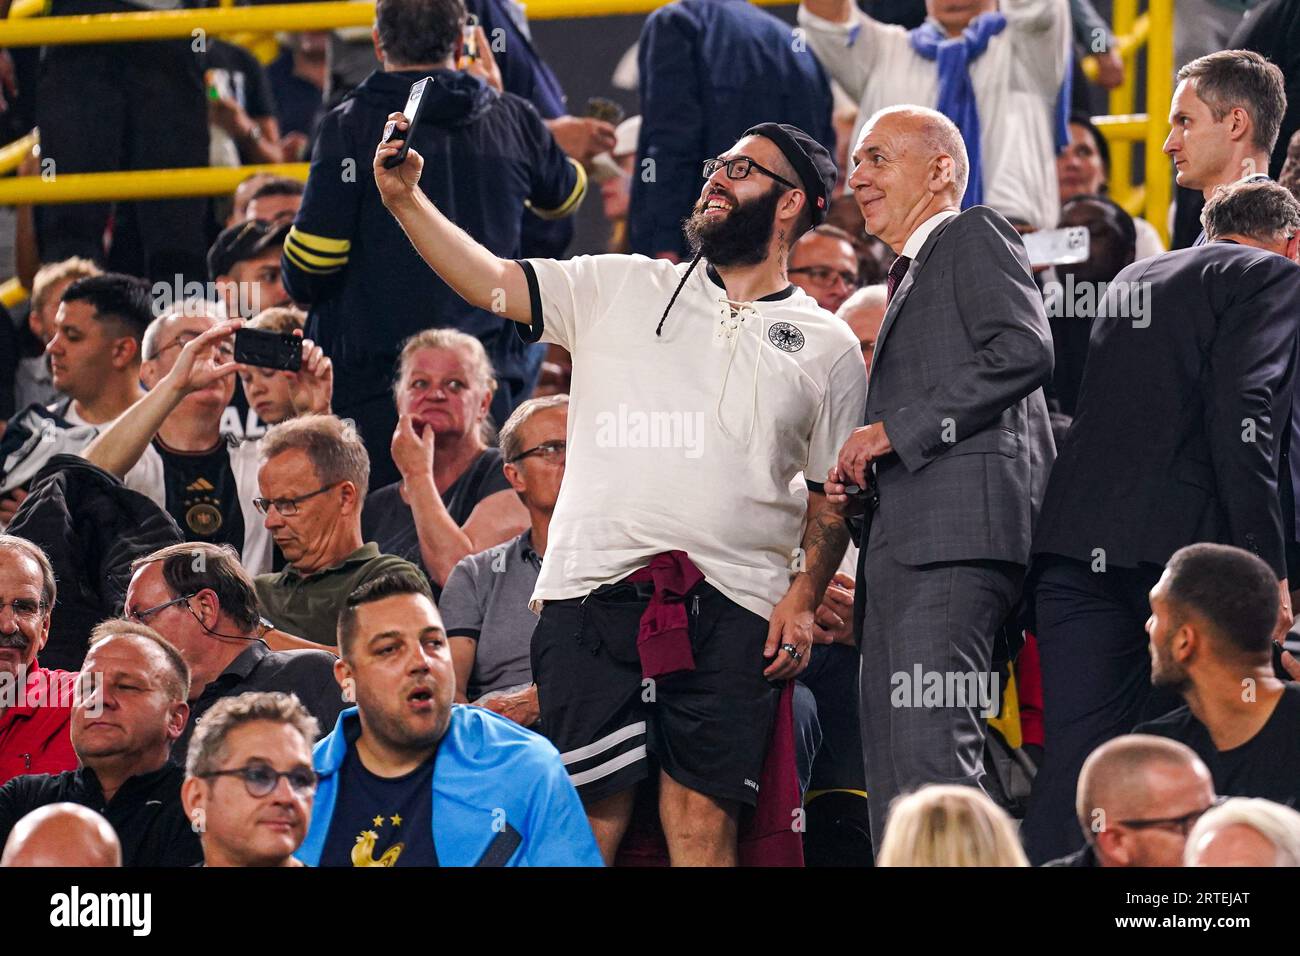 DORTMUND, GERMANY - SEPTEMBER 12: A fan is taking a selfie with Germany's DFB-director Bernd Neuendorf during the International Friendly match between Germany and France at Signal Iduna Park on September 12, 2023 in Dortmund, Germany. (Photo by Joris Verwijst/BSR Agency) Stock Photo